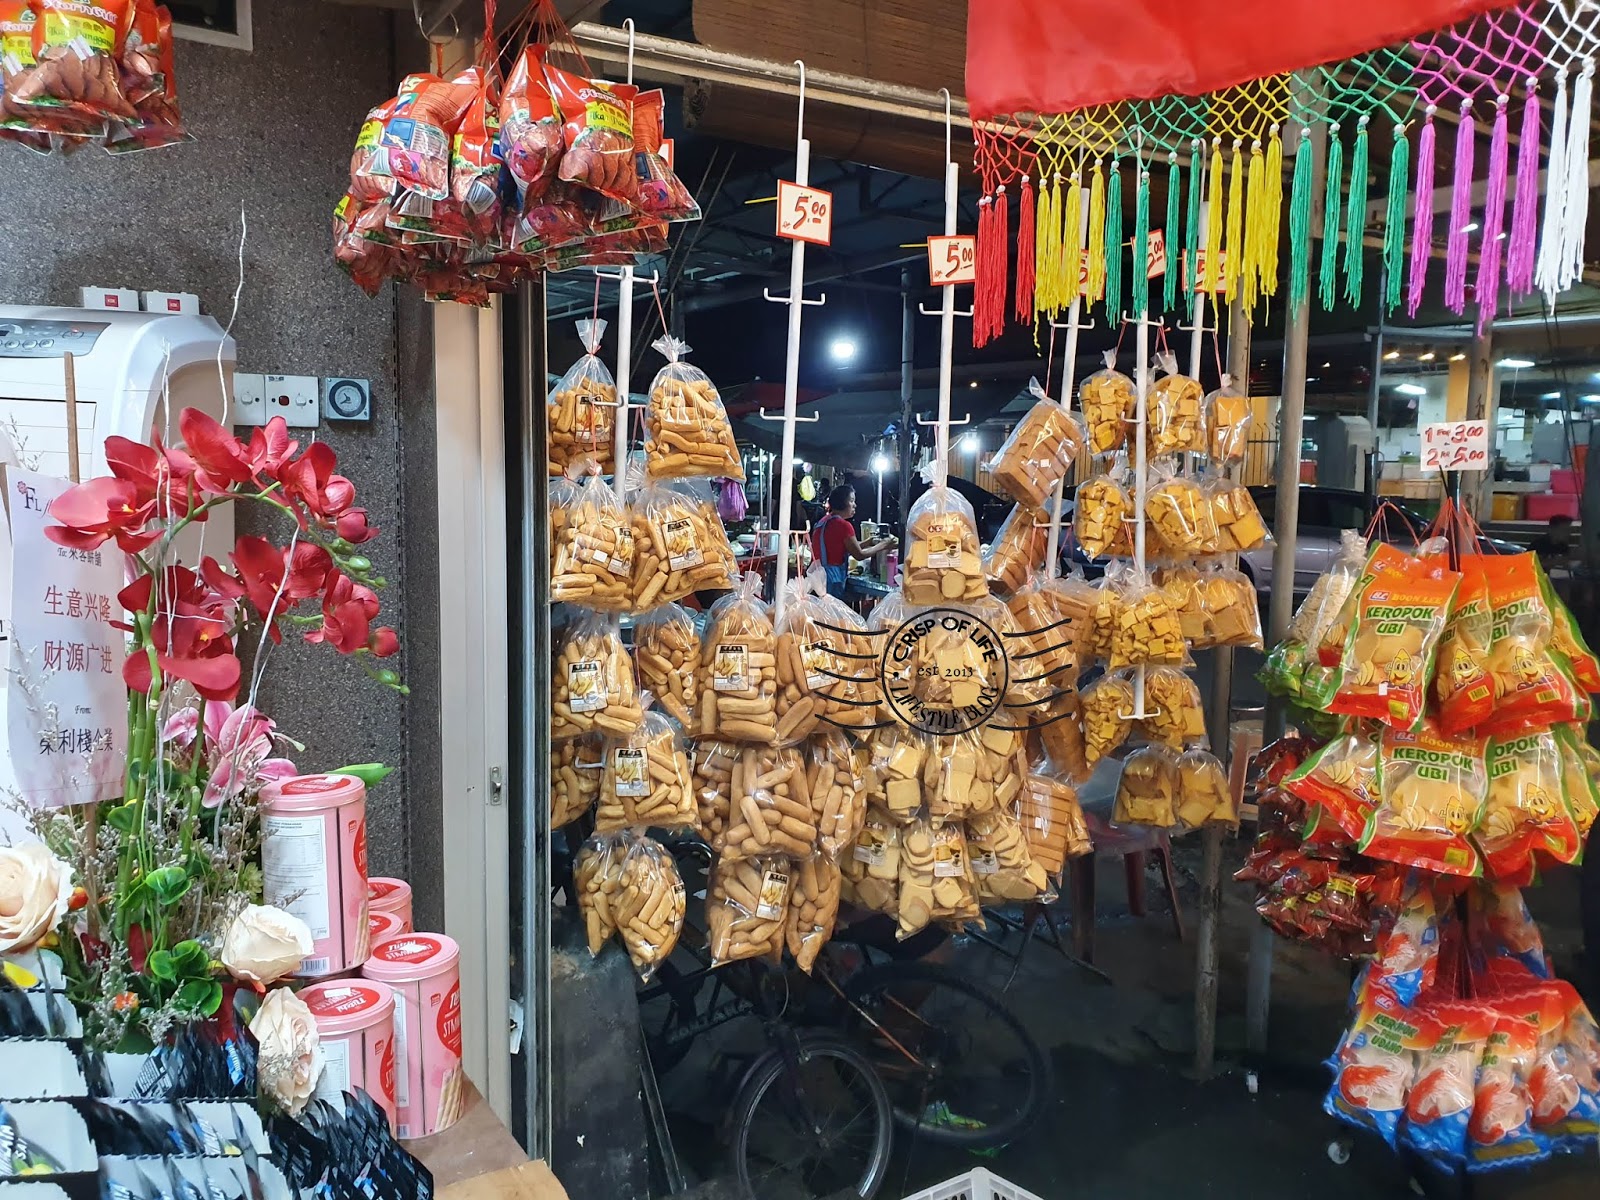 Nostajic Childhood Biscuits Shop - Like Biscuits Trading 铺饼客来 at Jelutong Market